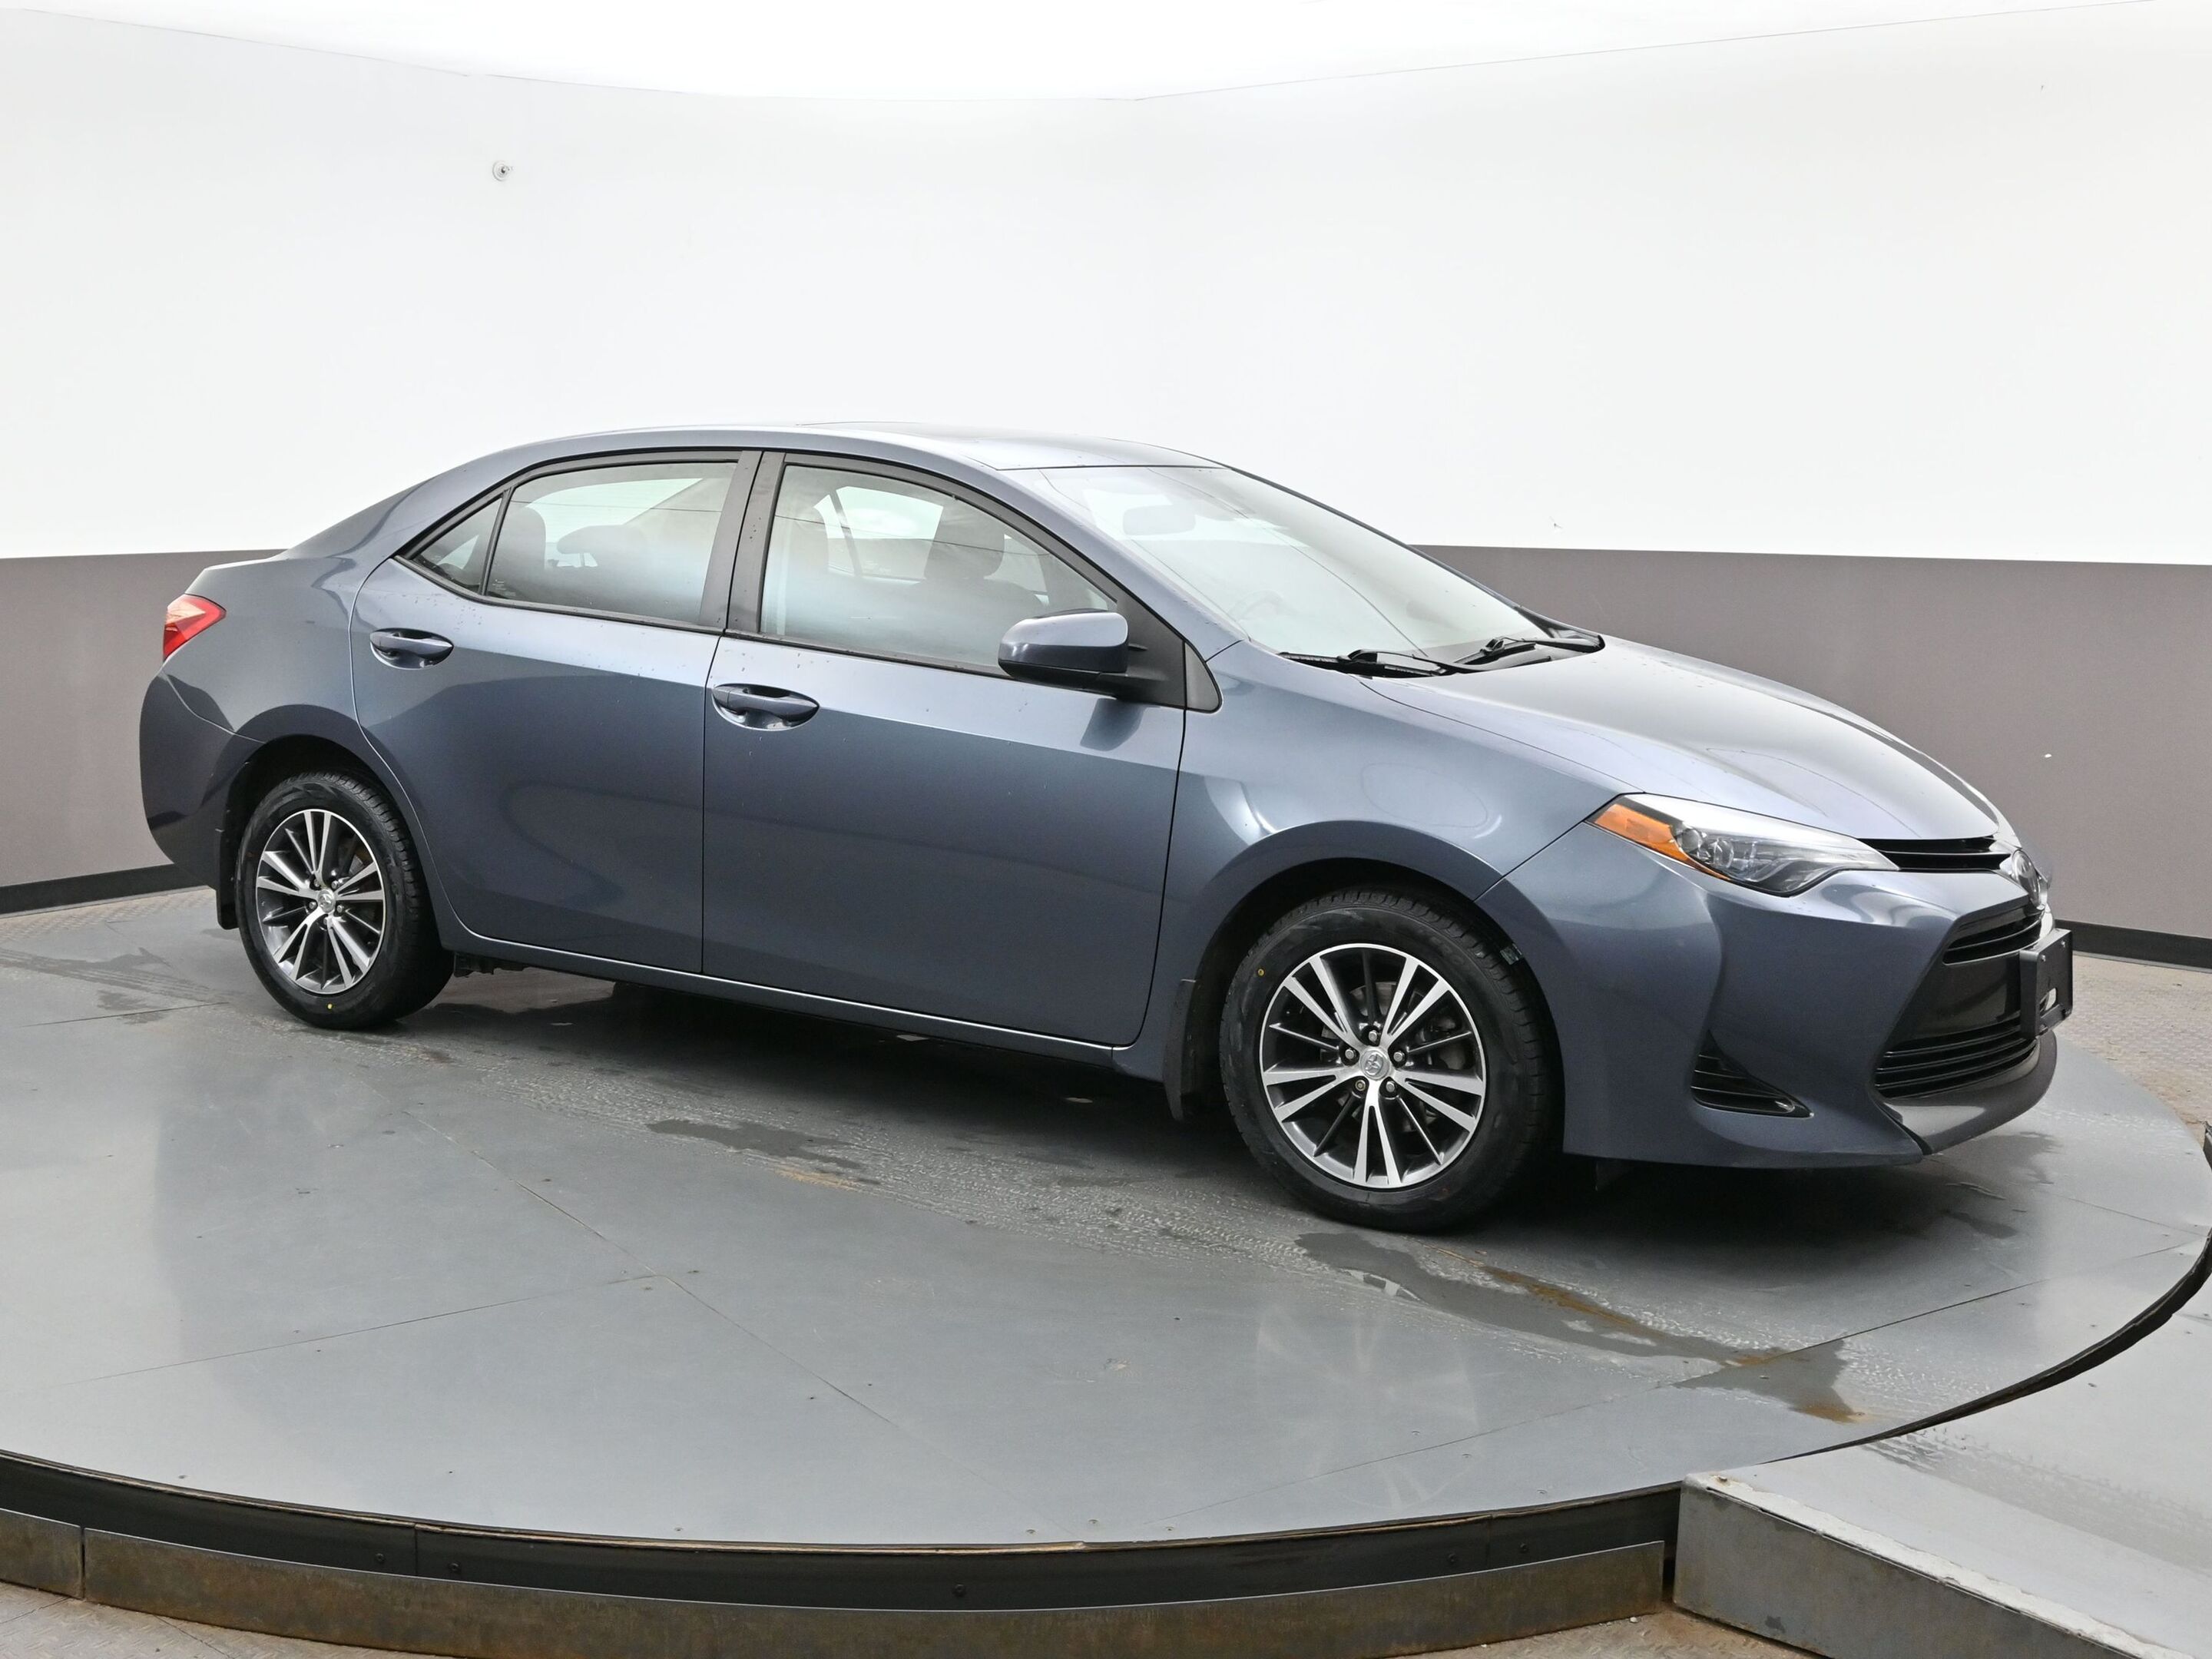 2018 Toyota Corolla LE Auto, A/C, Sunroof, Just Traded in, Clean Car F